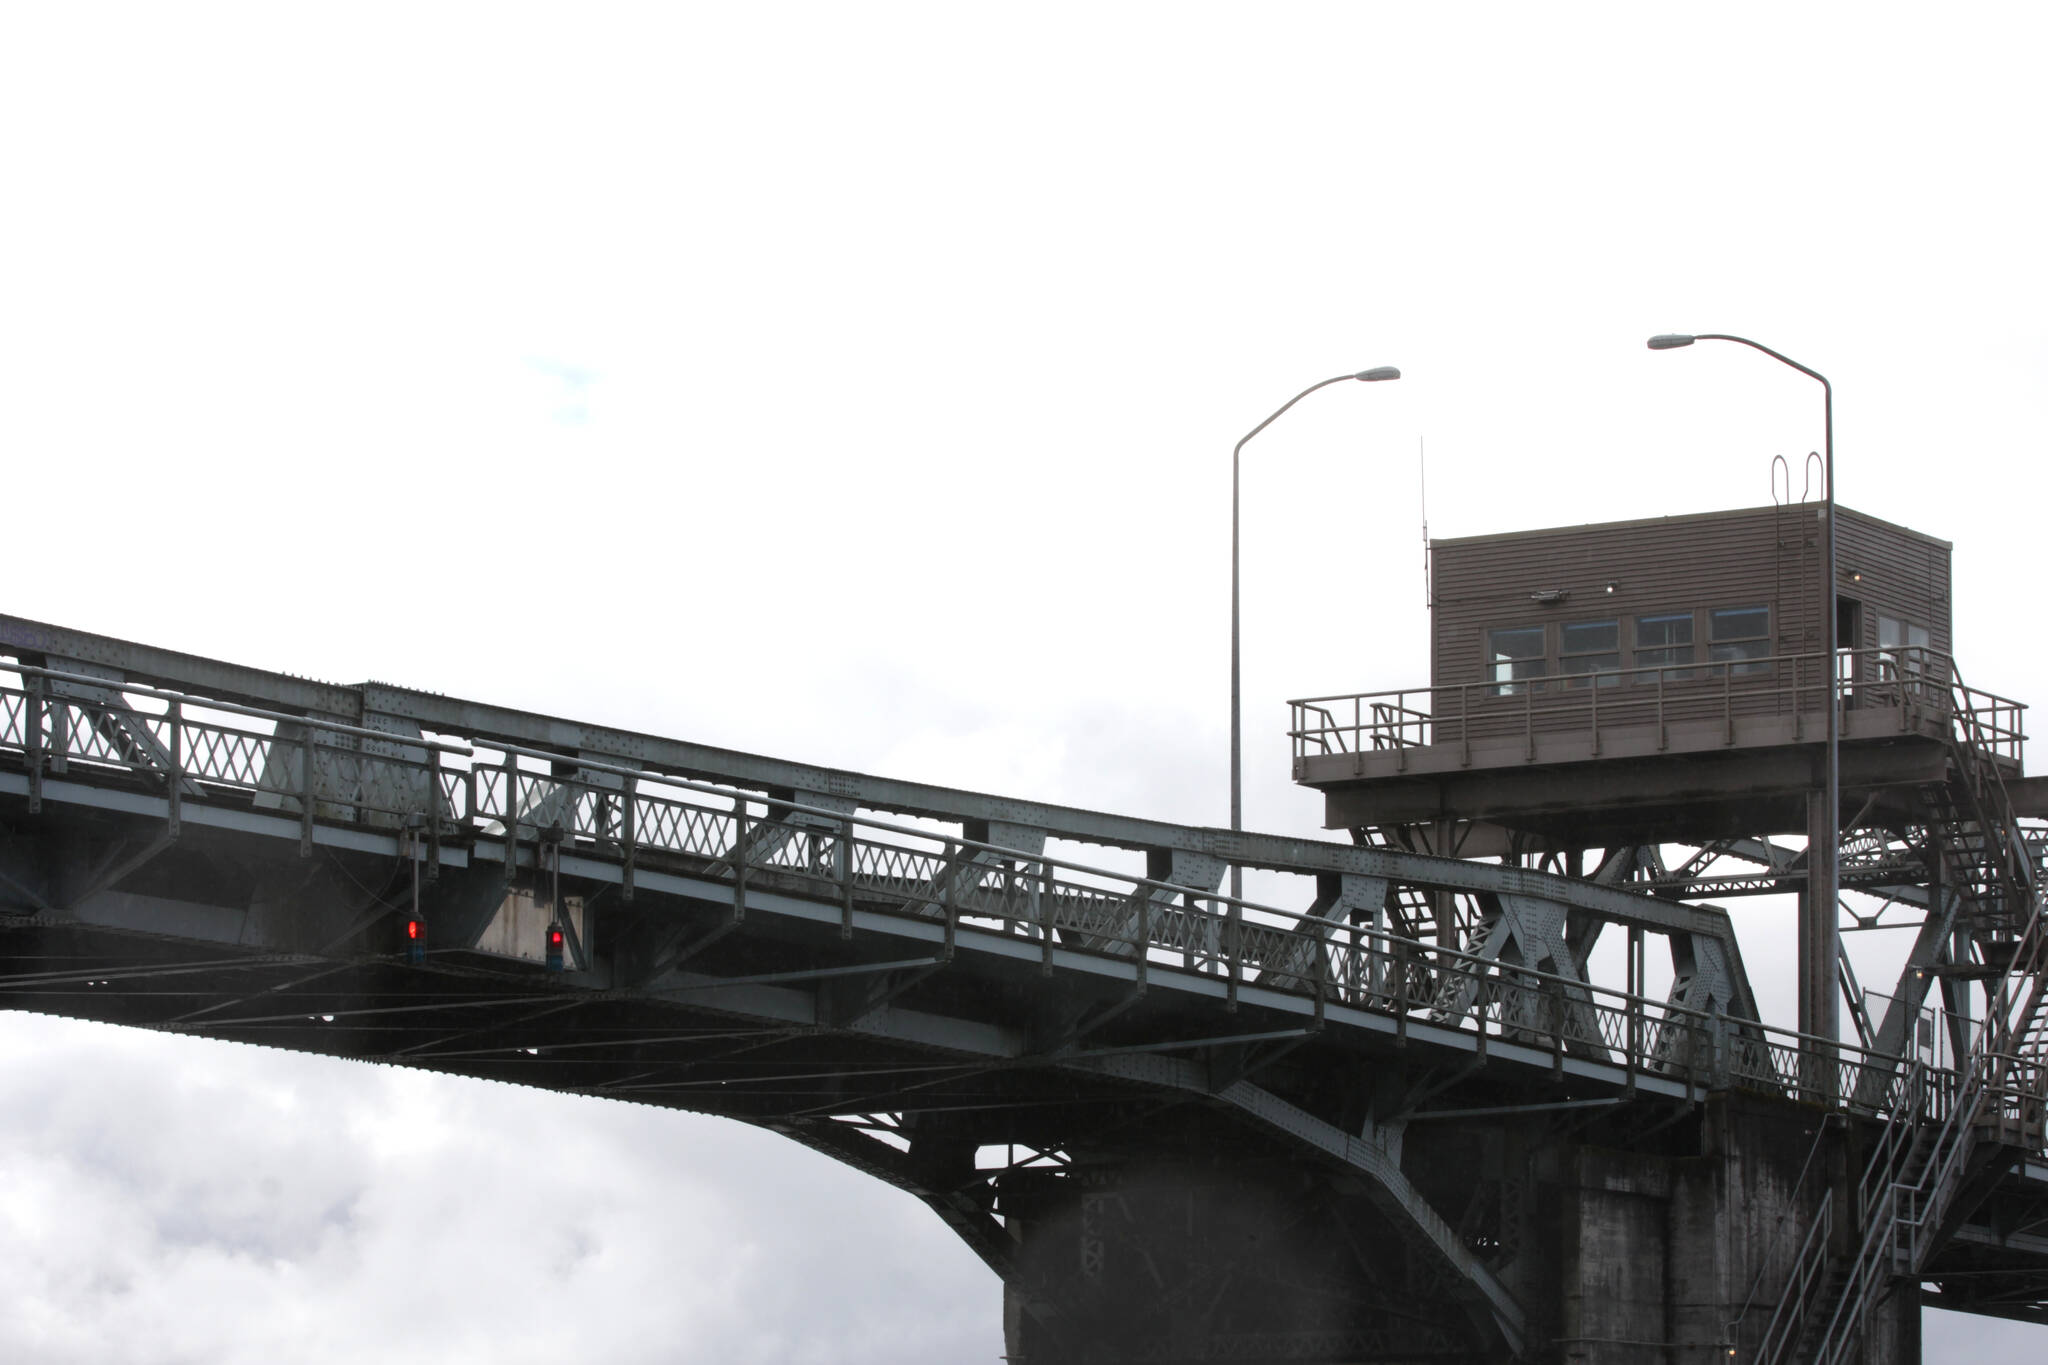 An uncommon issue disabled a Hoquiam drawbridge for several hours Monday while Washington State Department of Transportation personnel worked to isolate and correct the fault. 
Michael S. Lockett / The Daily World